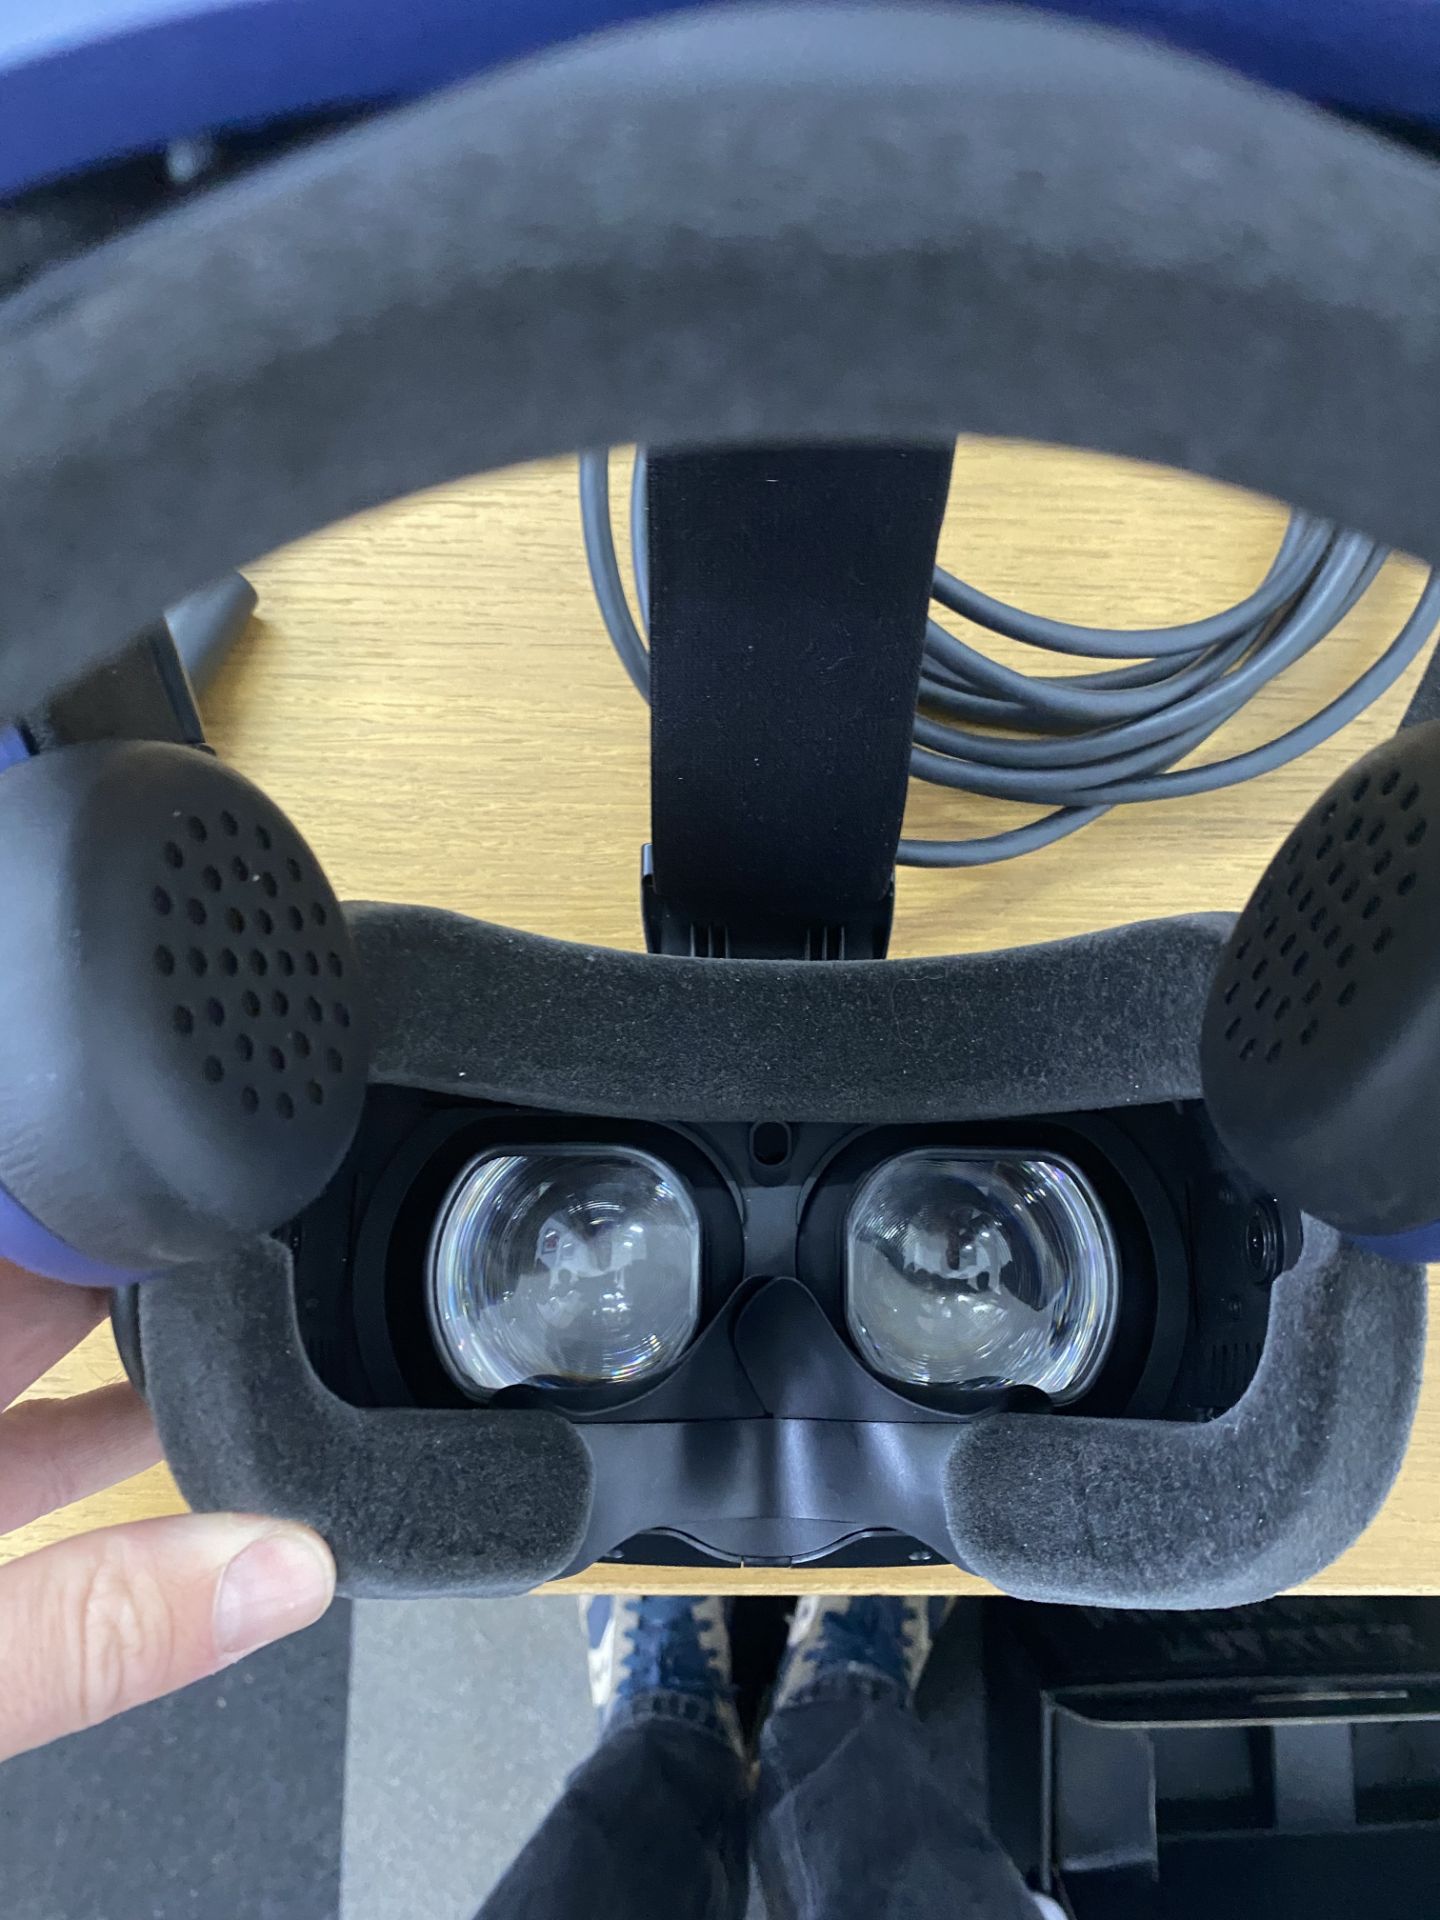 HTC Vive Pro 2 VR Headset - Image 3 of 9